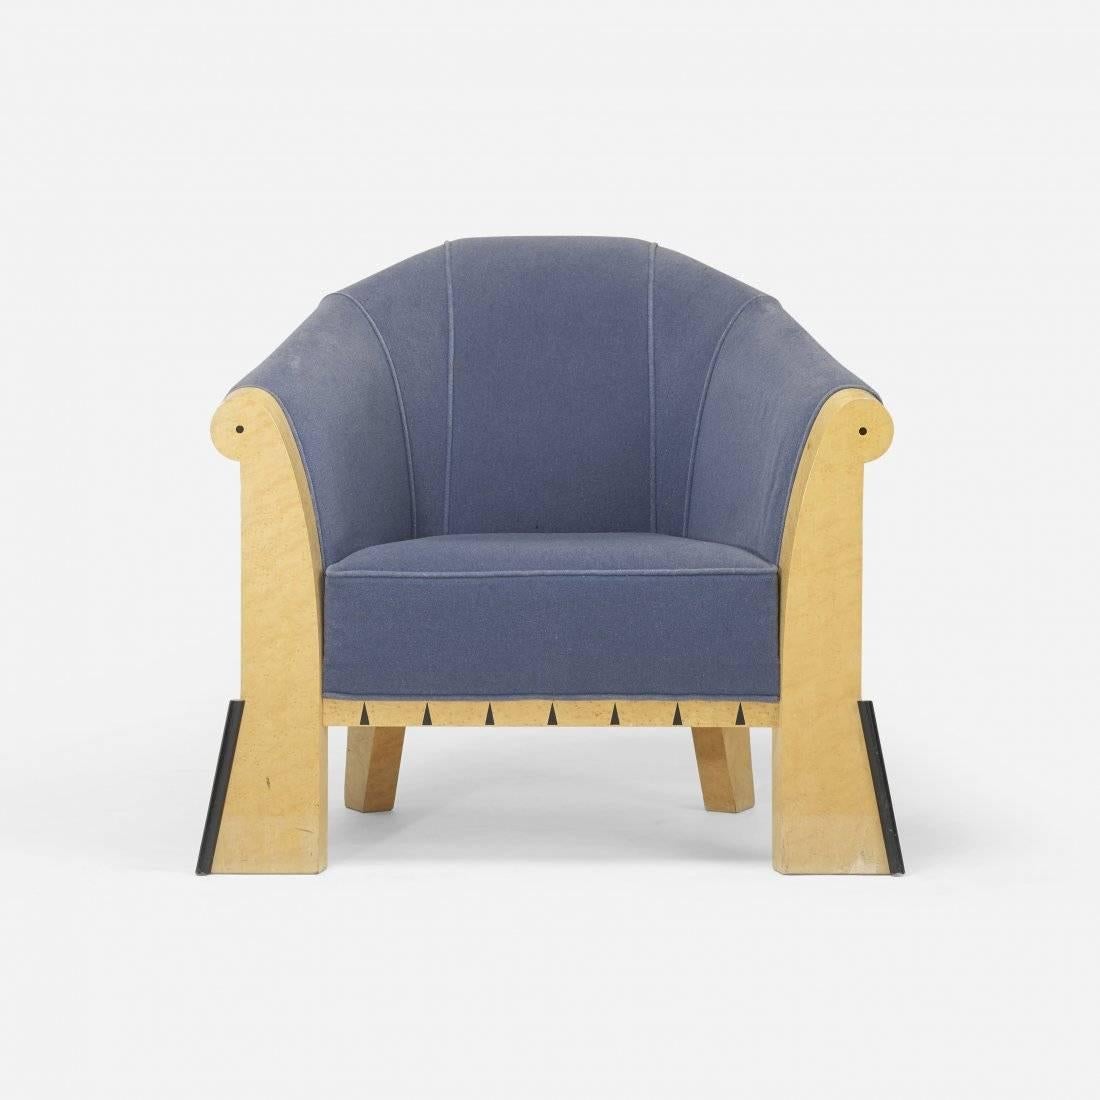 Michael Graves (1934-2015),
lounge chair.
Sunar Hauserman,
USA, 1980.
Maple burl, upholstery, lacquered wood.
Measures: 34 W x 31 D x 29.5 H inches.